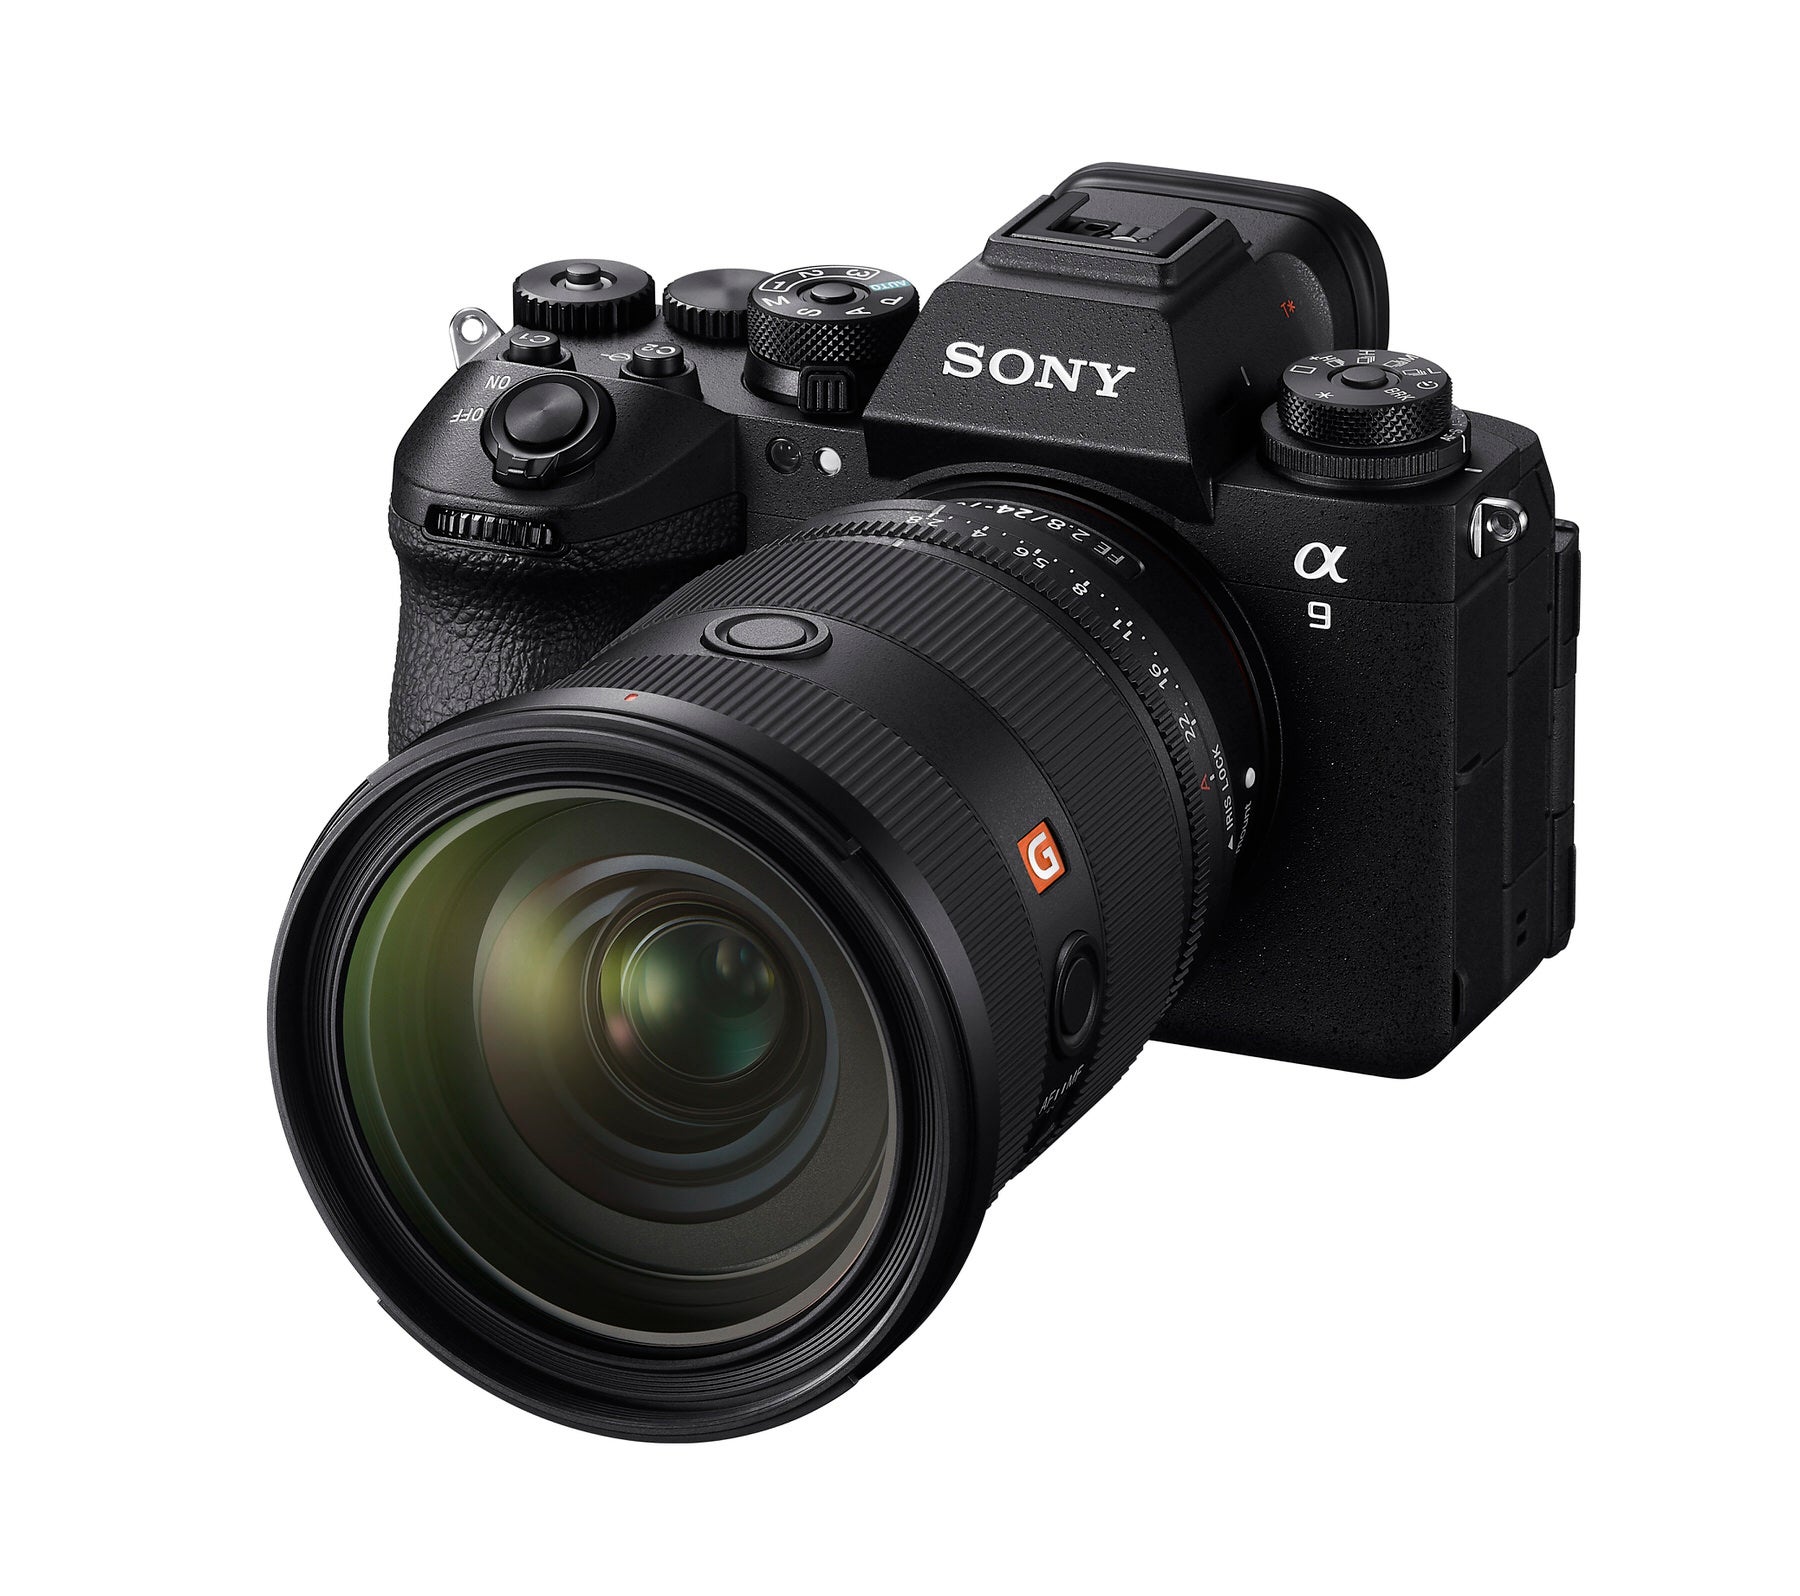 Sony Releases the Alpha 9 III Full-Frame Camera With Global